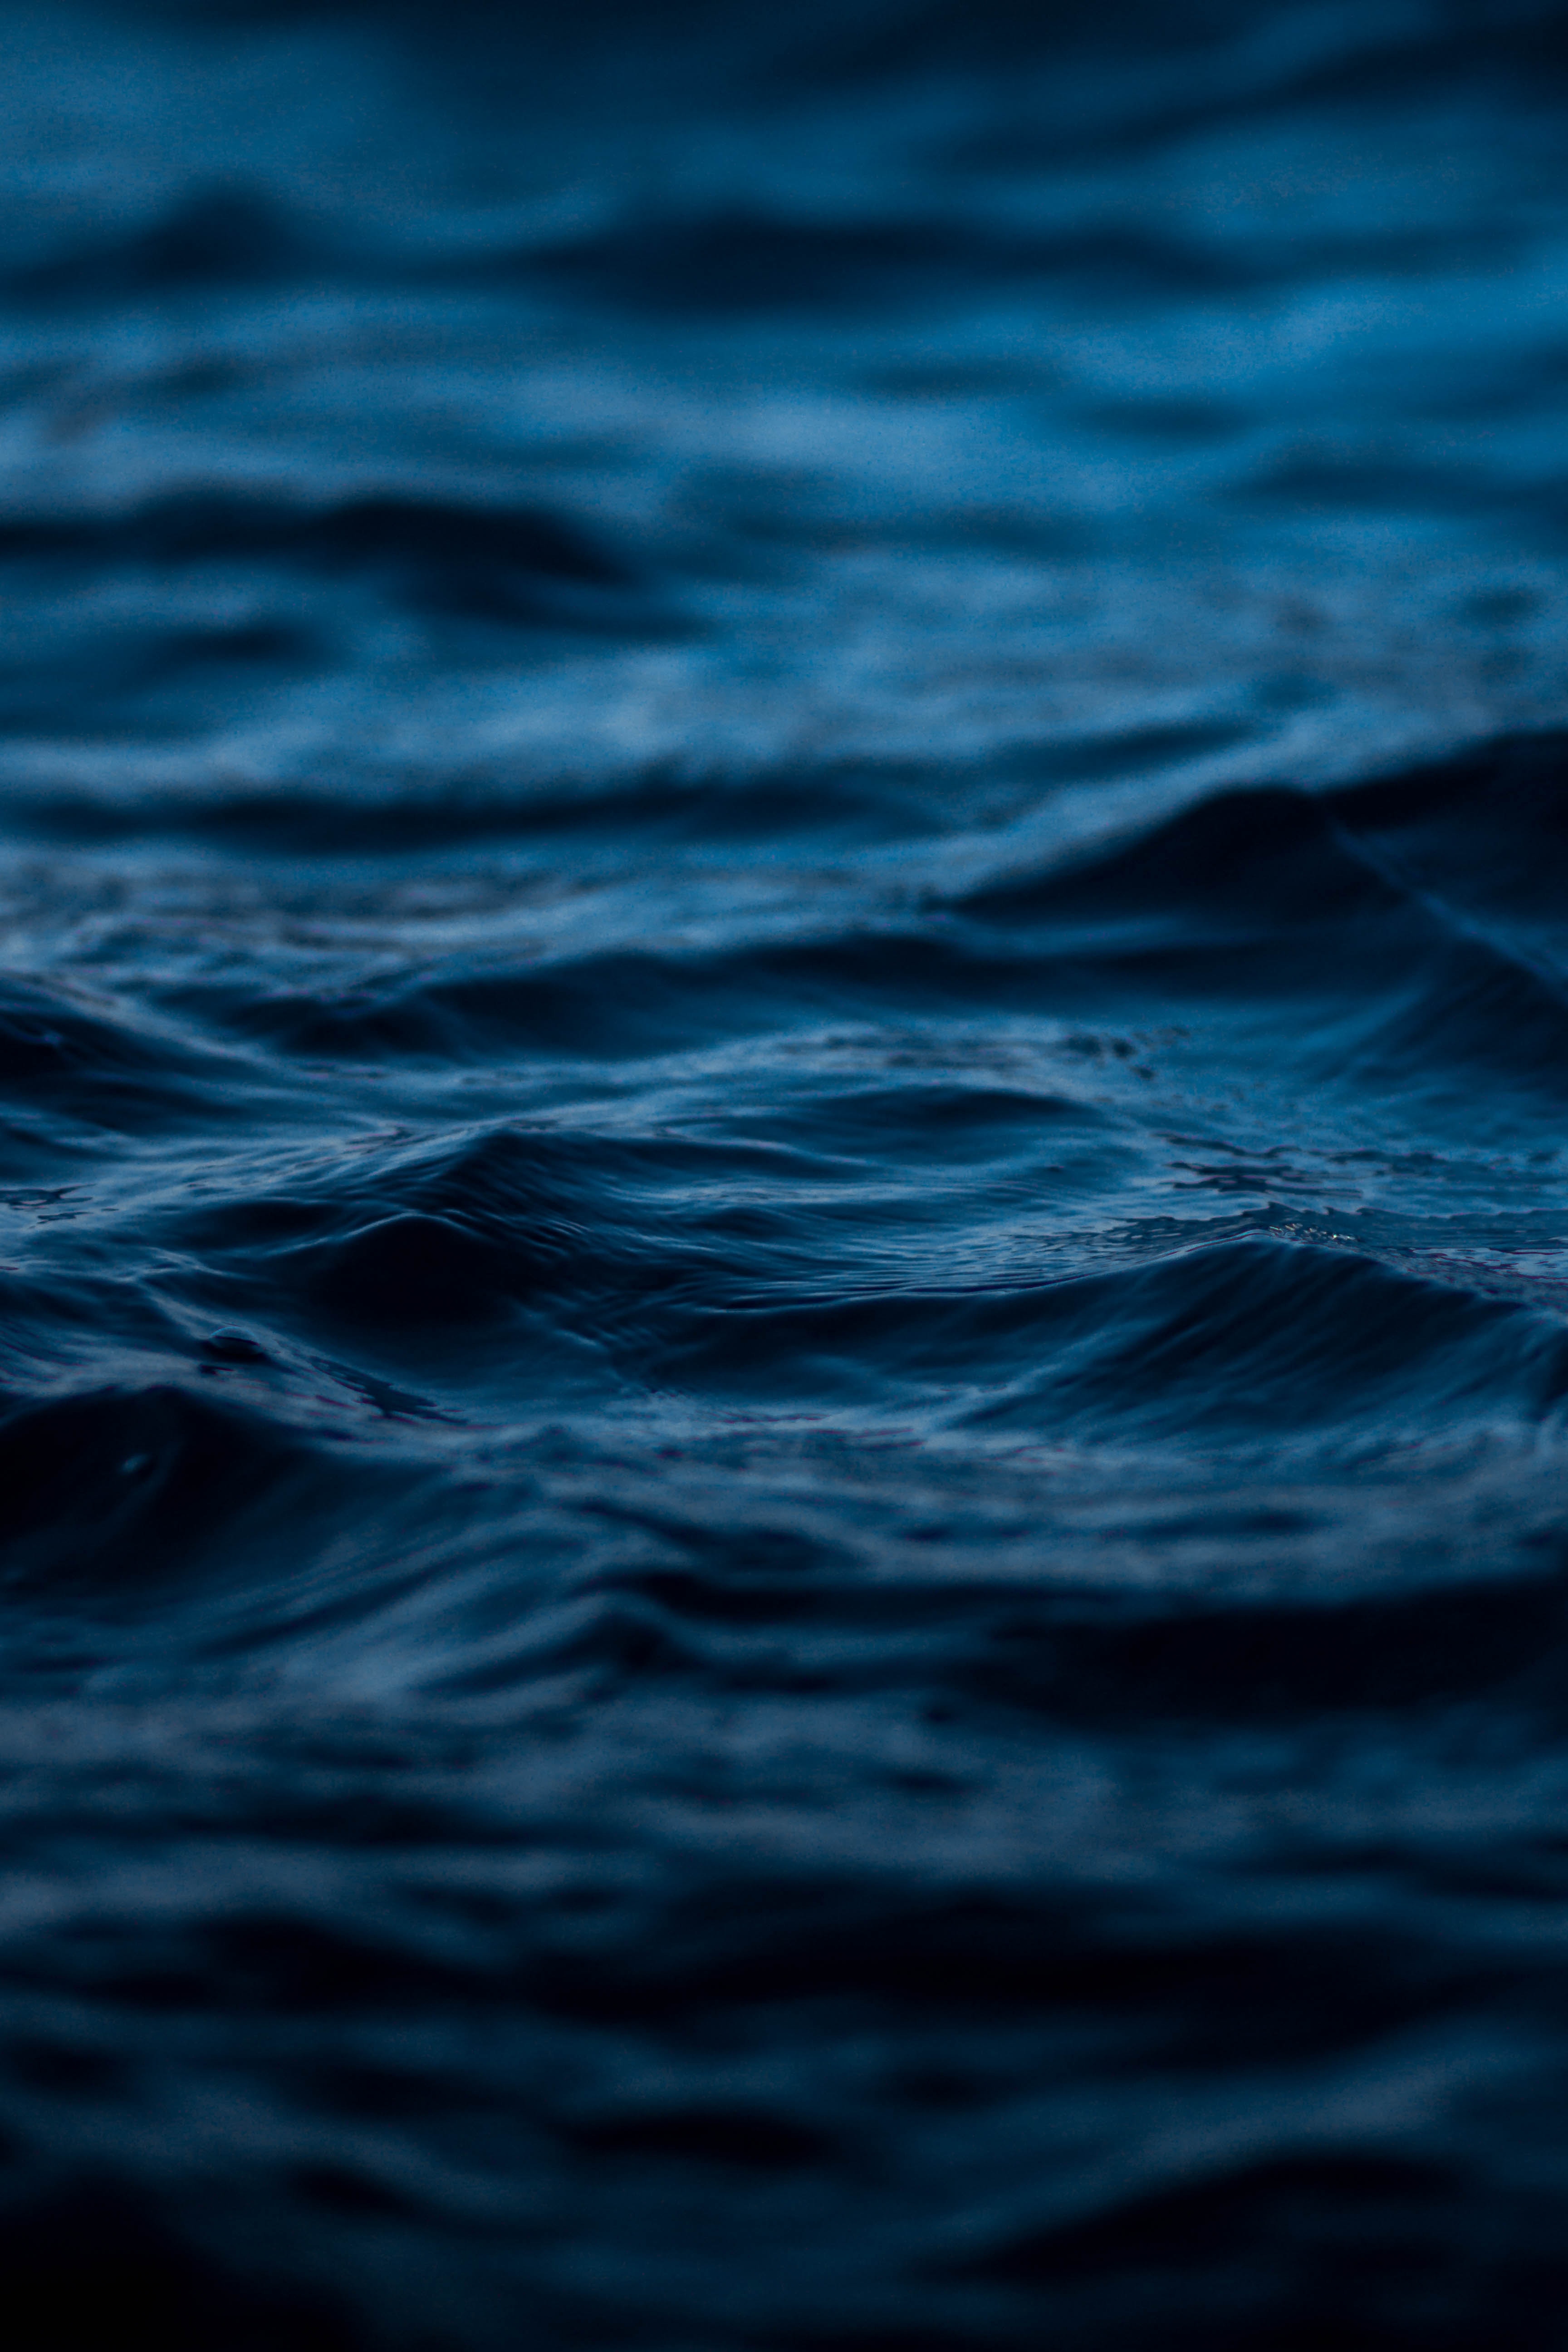 88521 download wallpaper nature, water, sea, ripples, ripple, blur, smooth, wave screensavers and pictures for free